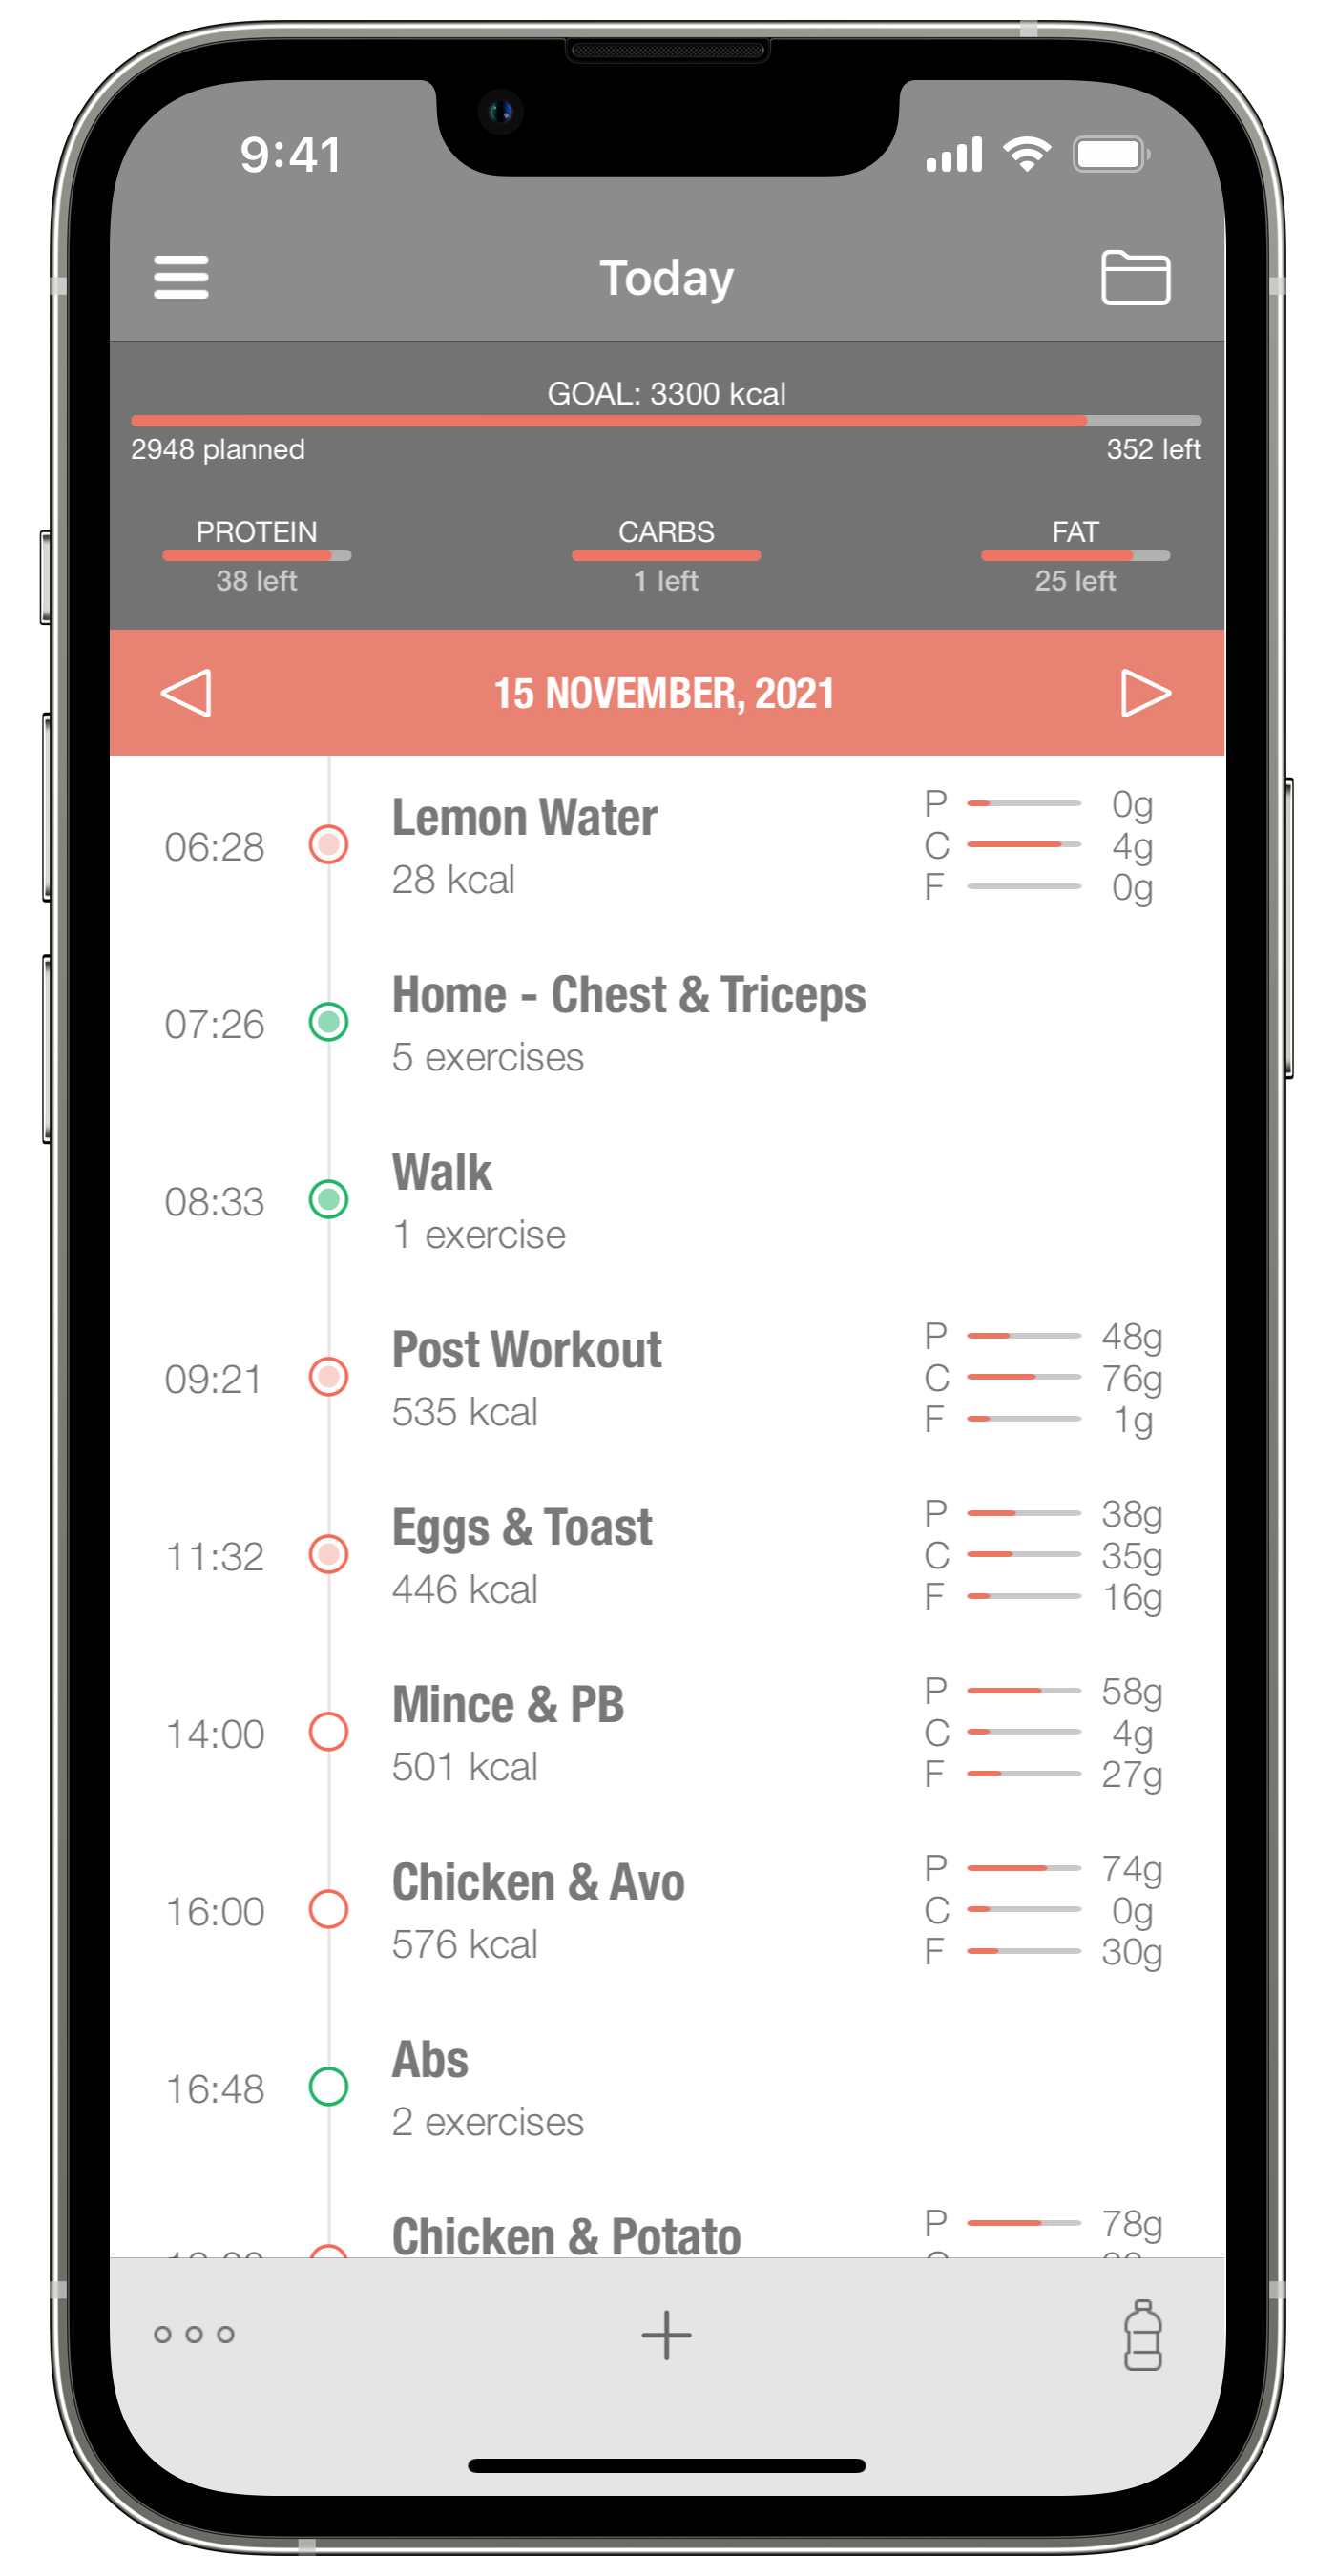 gym workout app showing timeline for planning and tracking meals and workouts